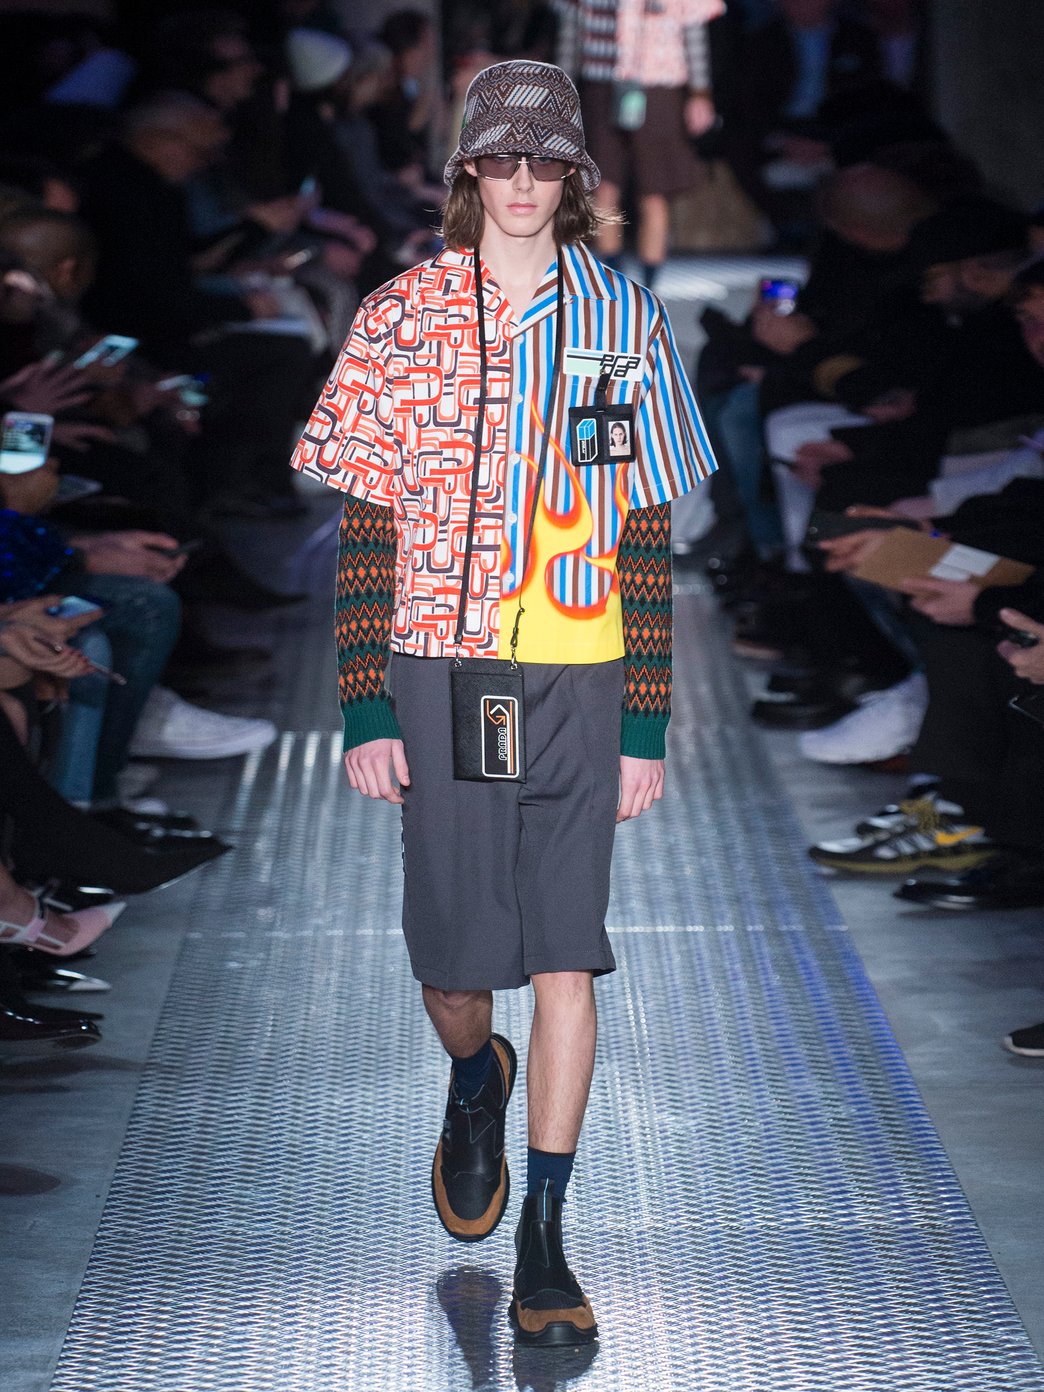 PRADA: The Bowling Shirt Taking Over the Game